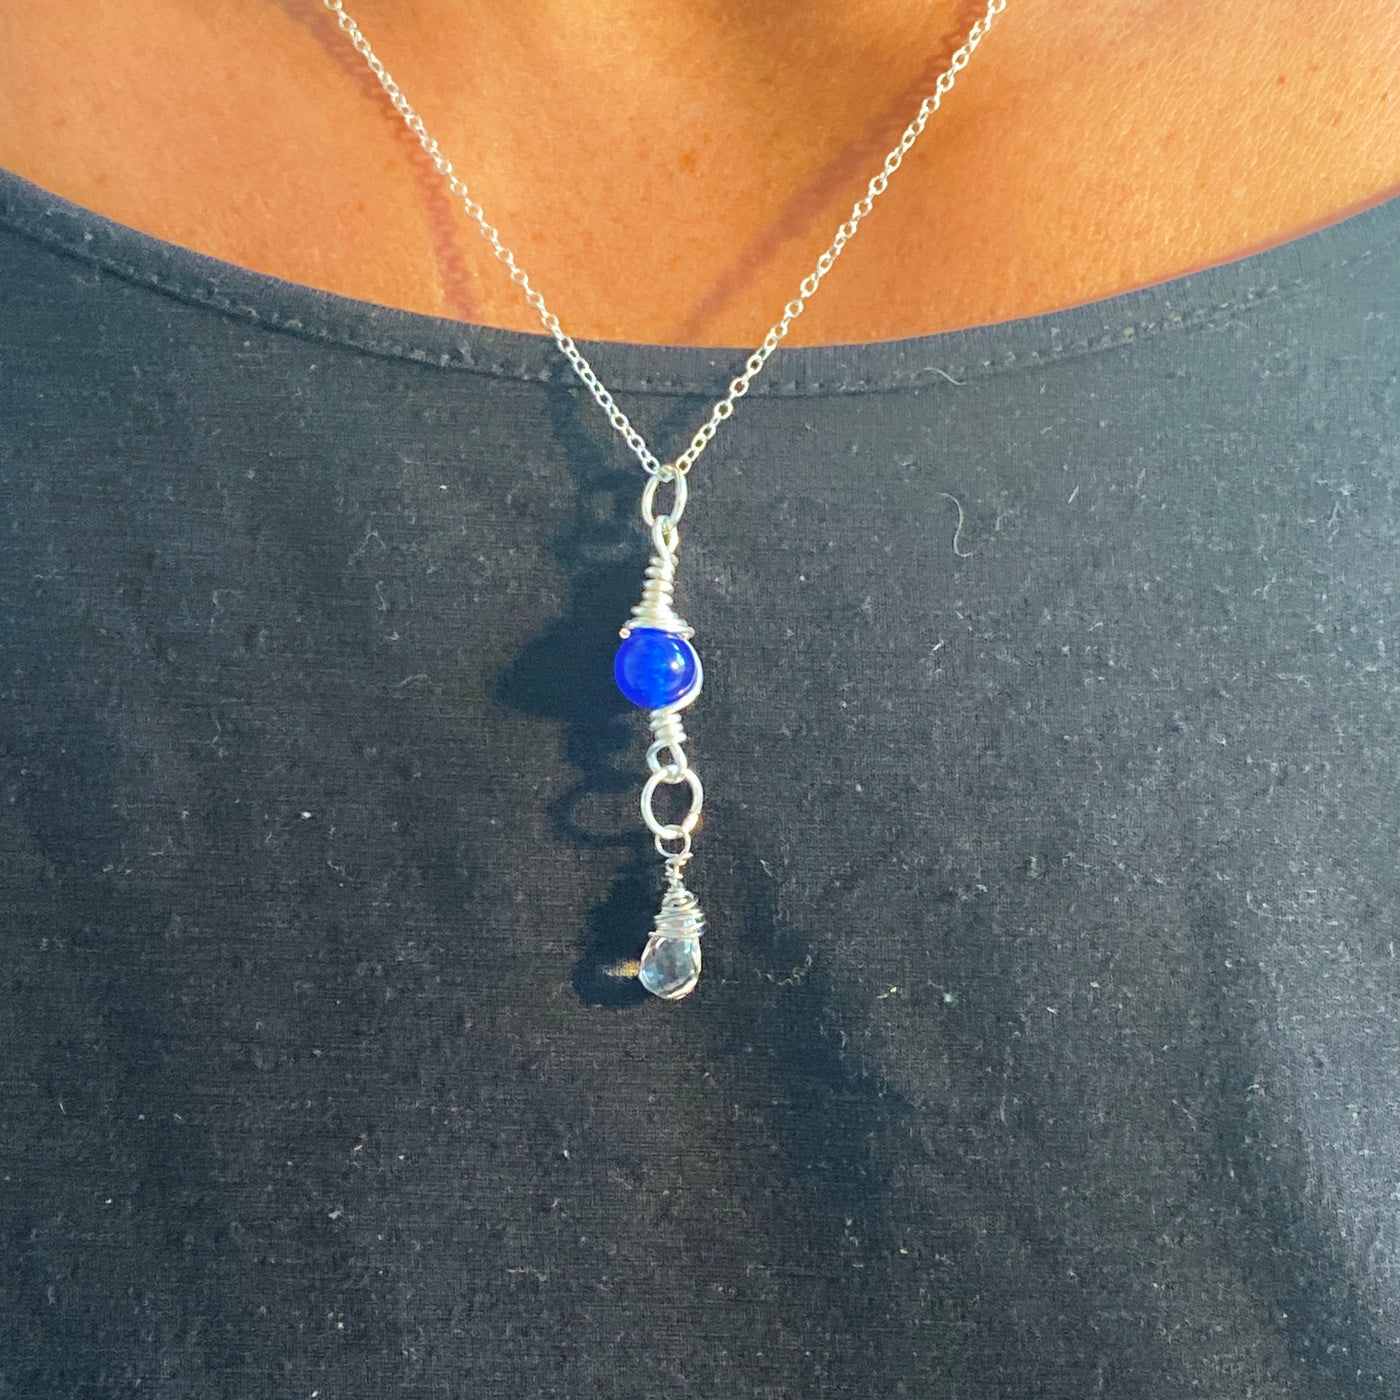 Necklace: Blue howlite and Crystal briolette on chain